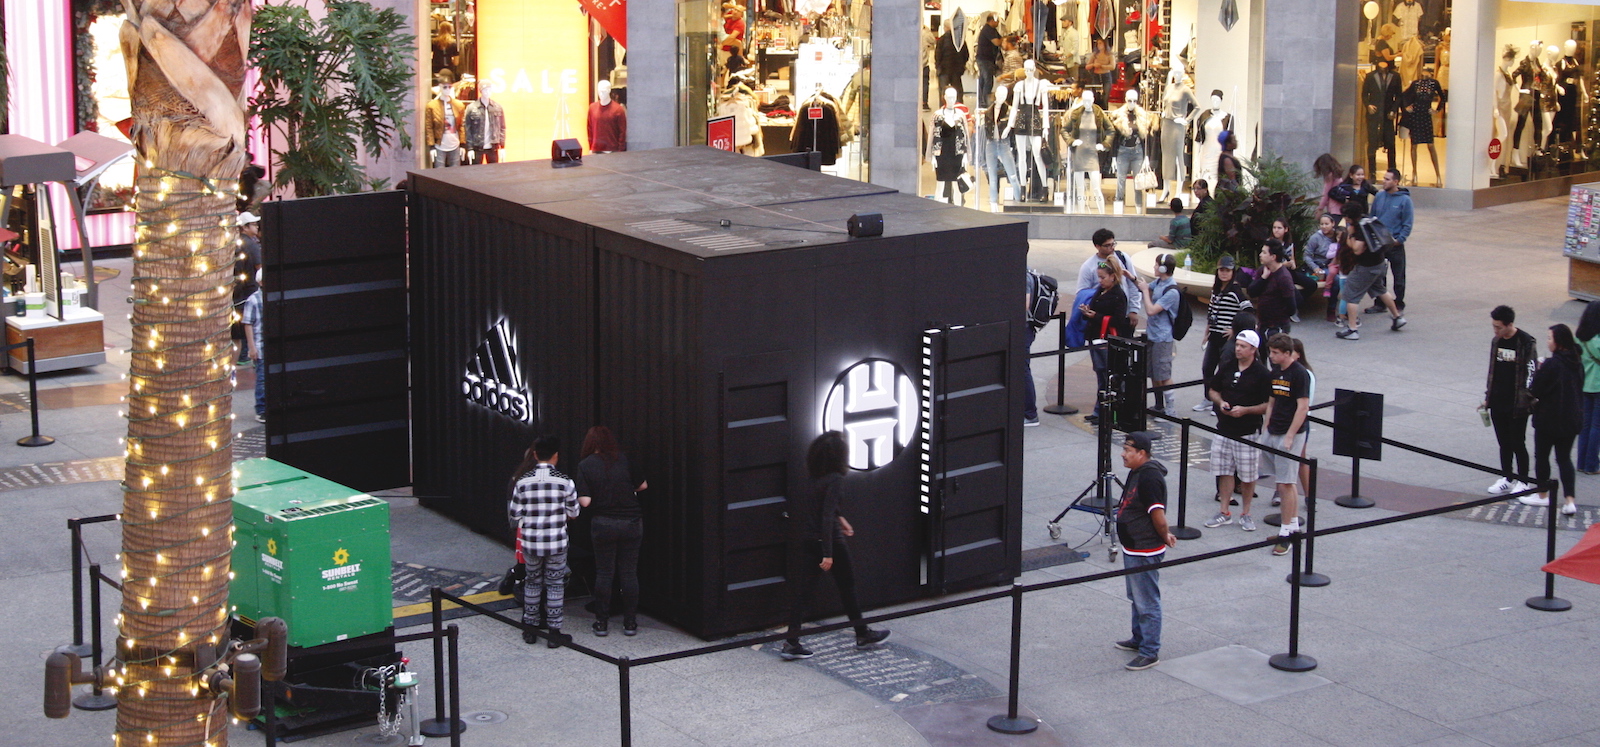 An aerial view of the activation pod which is a large black shipping container with large lit adidas and Harden logos, and a door cracked open to reveal a black and white striped glowing interior.